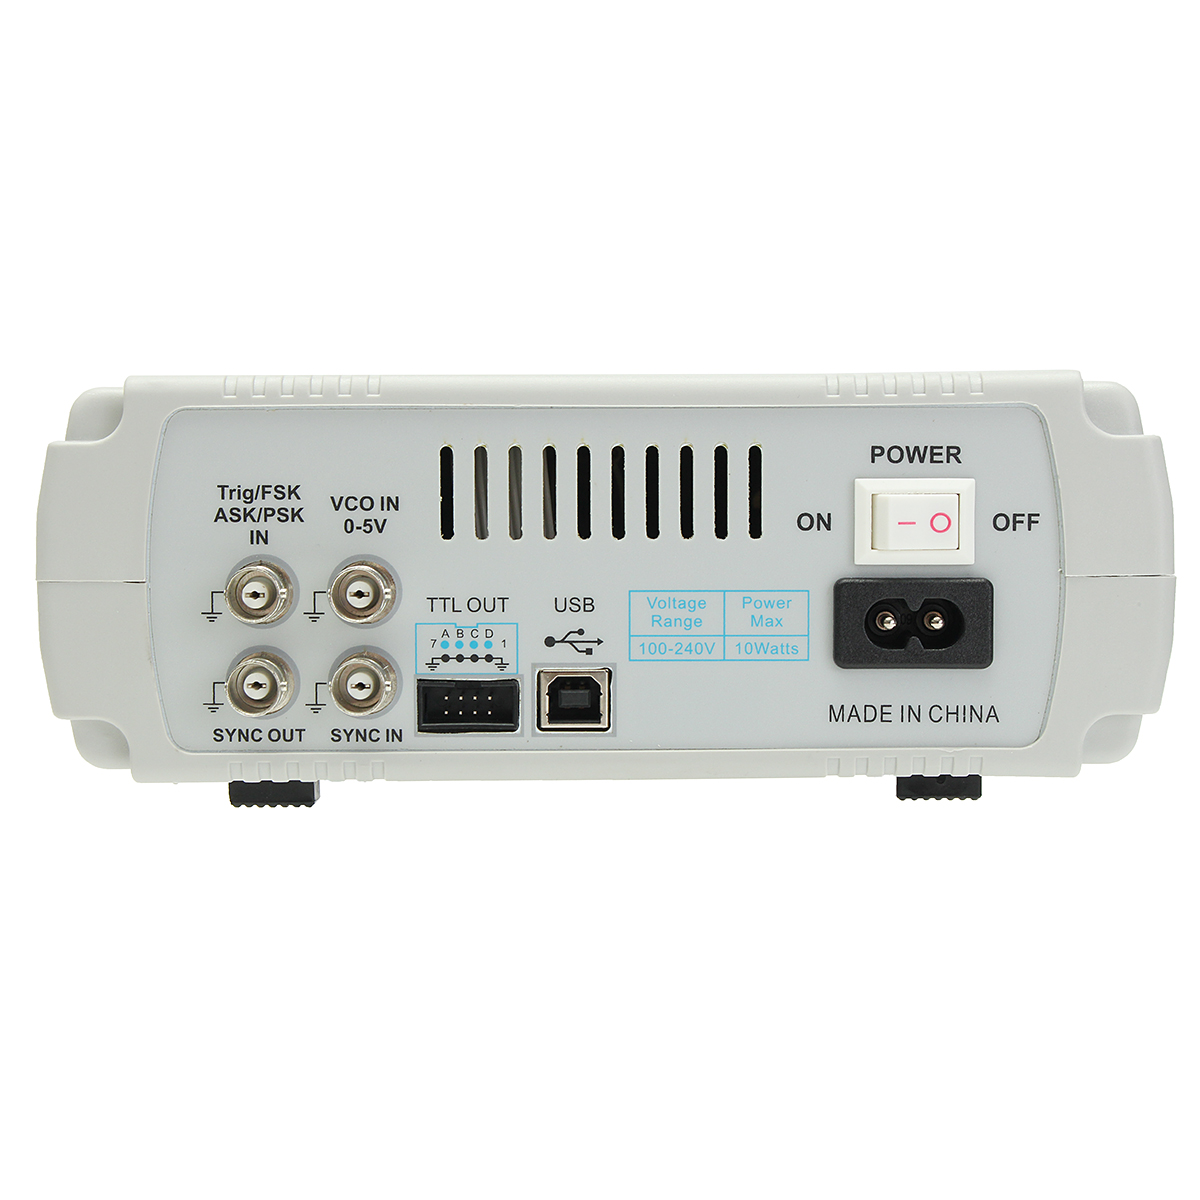 FY6600 Digital 12-60MHz Dual Channel DDS Function Arbitrary Waveform Signal Generator Frequency Meter 35